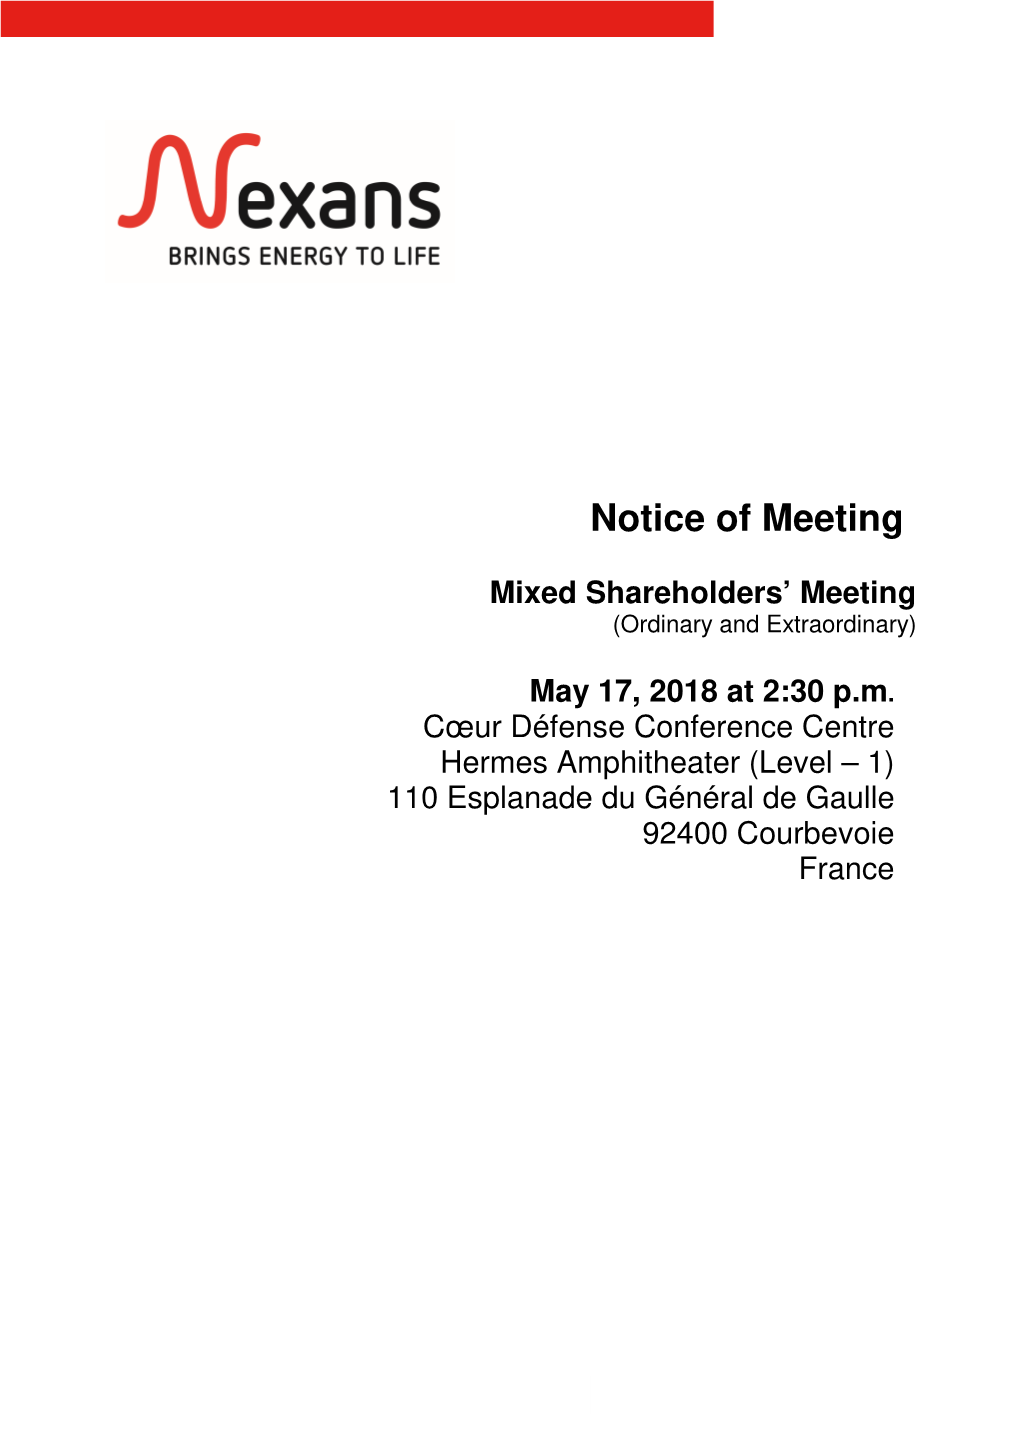 Shareholders Meeting Notice AGM 2018 GB Print V3 Clean